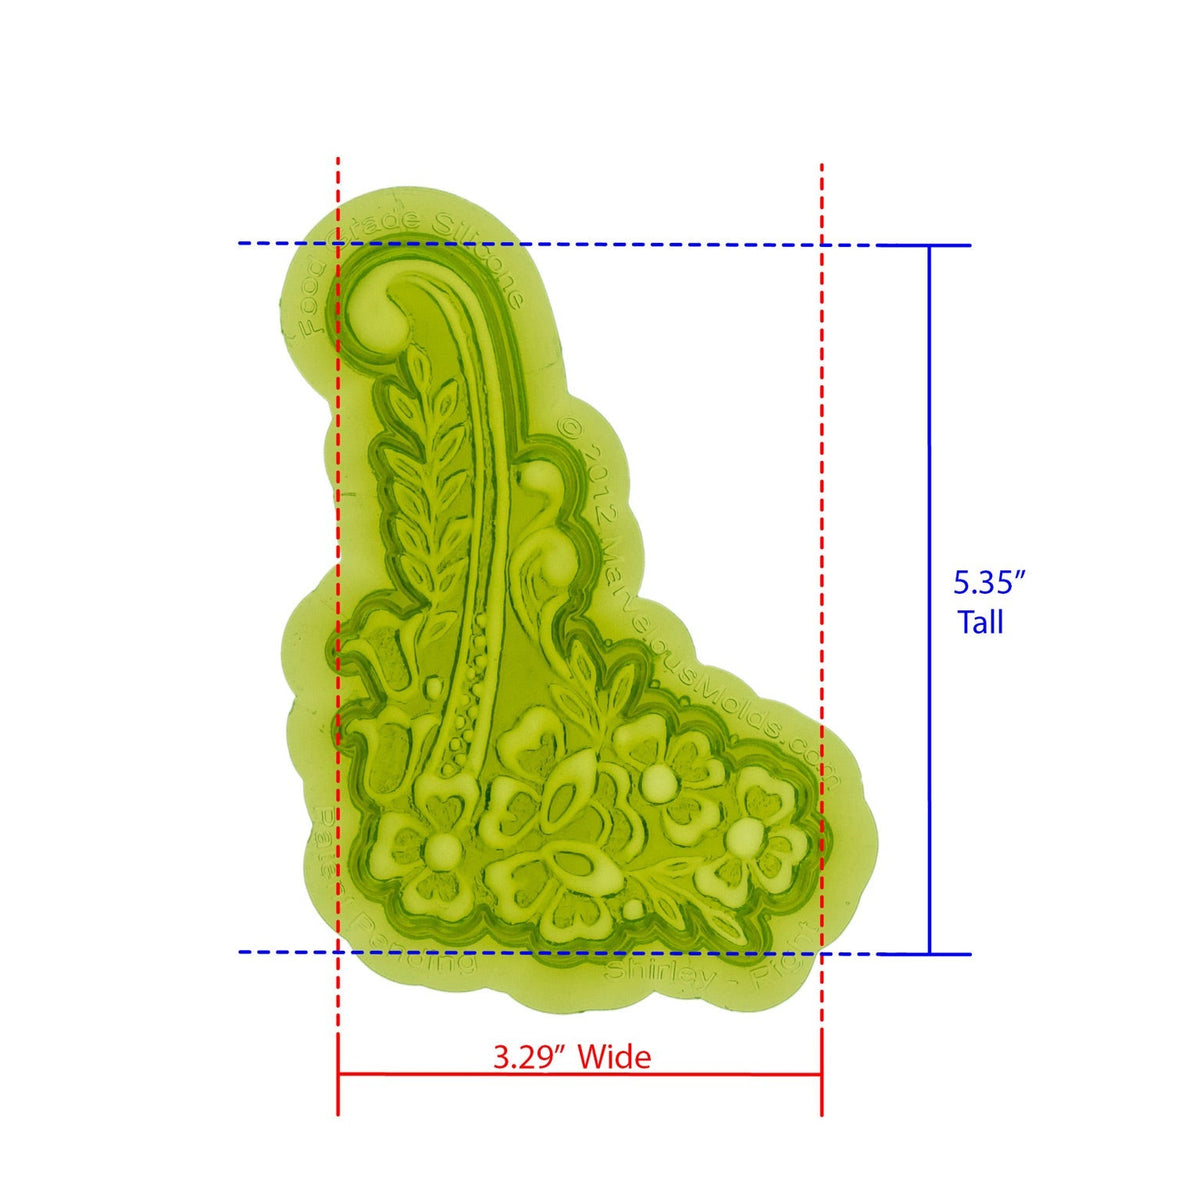 Shirley Right Lace Silicone Mold Cavity measures 3.29 inches Wide by 5.35 inches Tall, proudly Made in USA